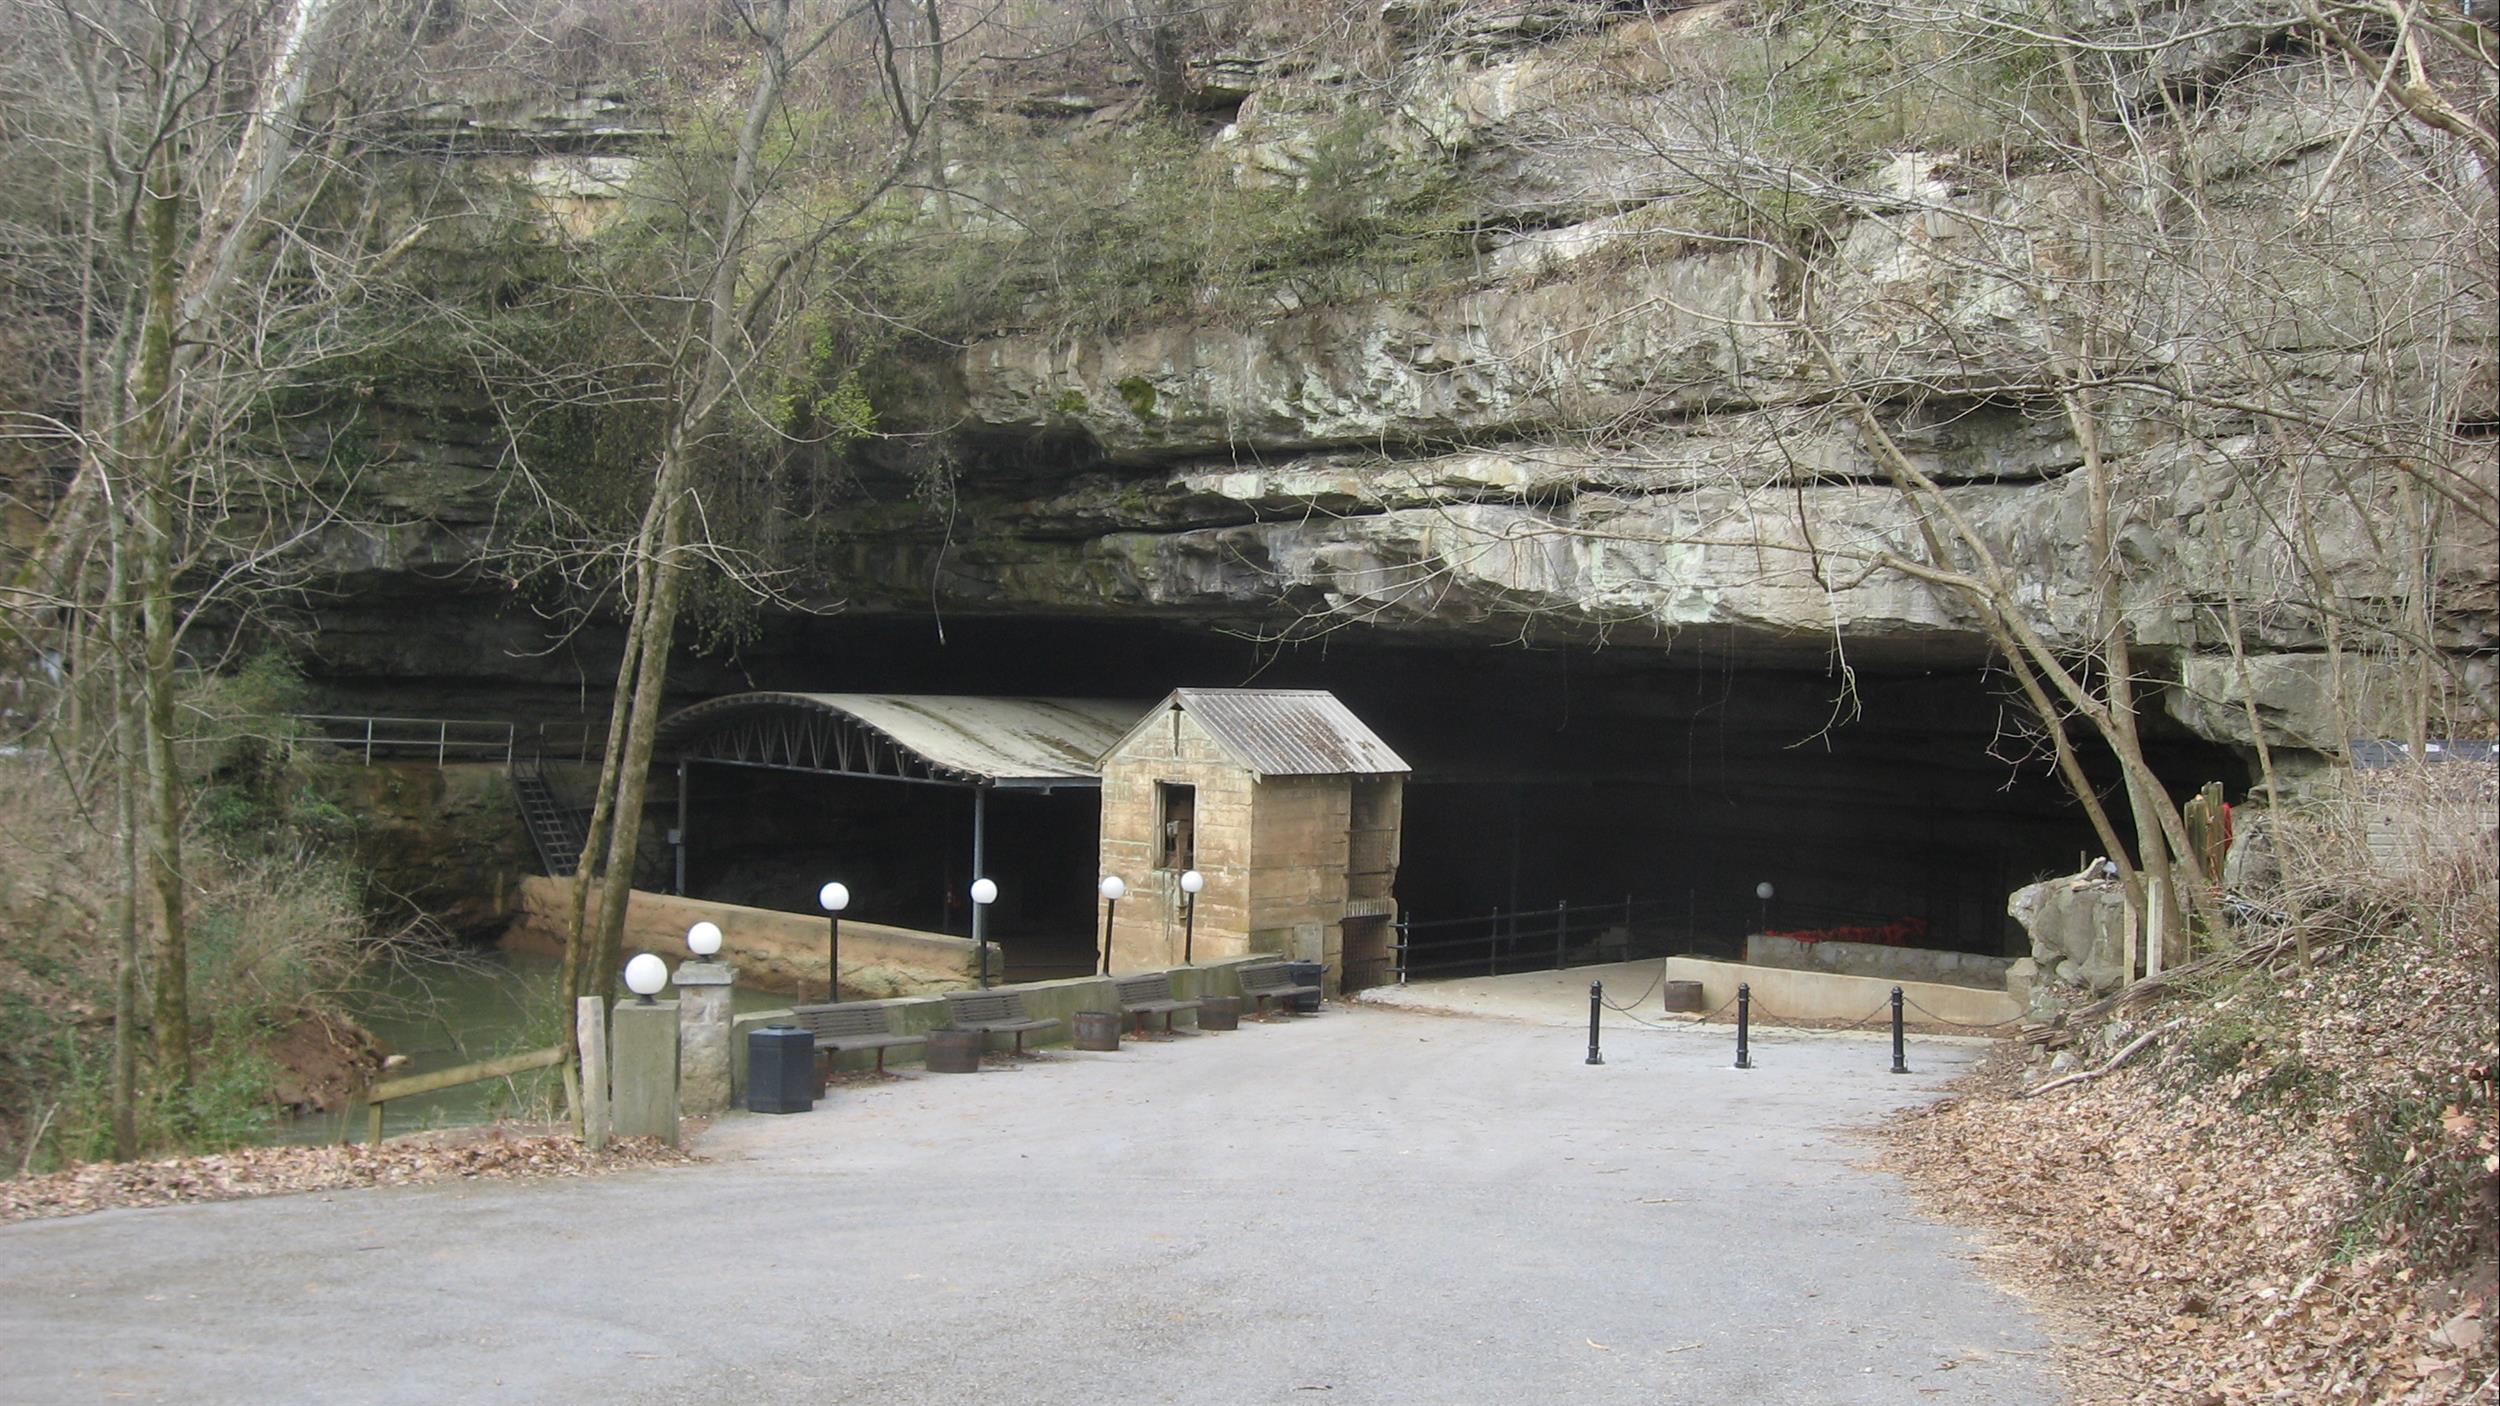 MOUNTAIN CAVE TUNNEL